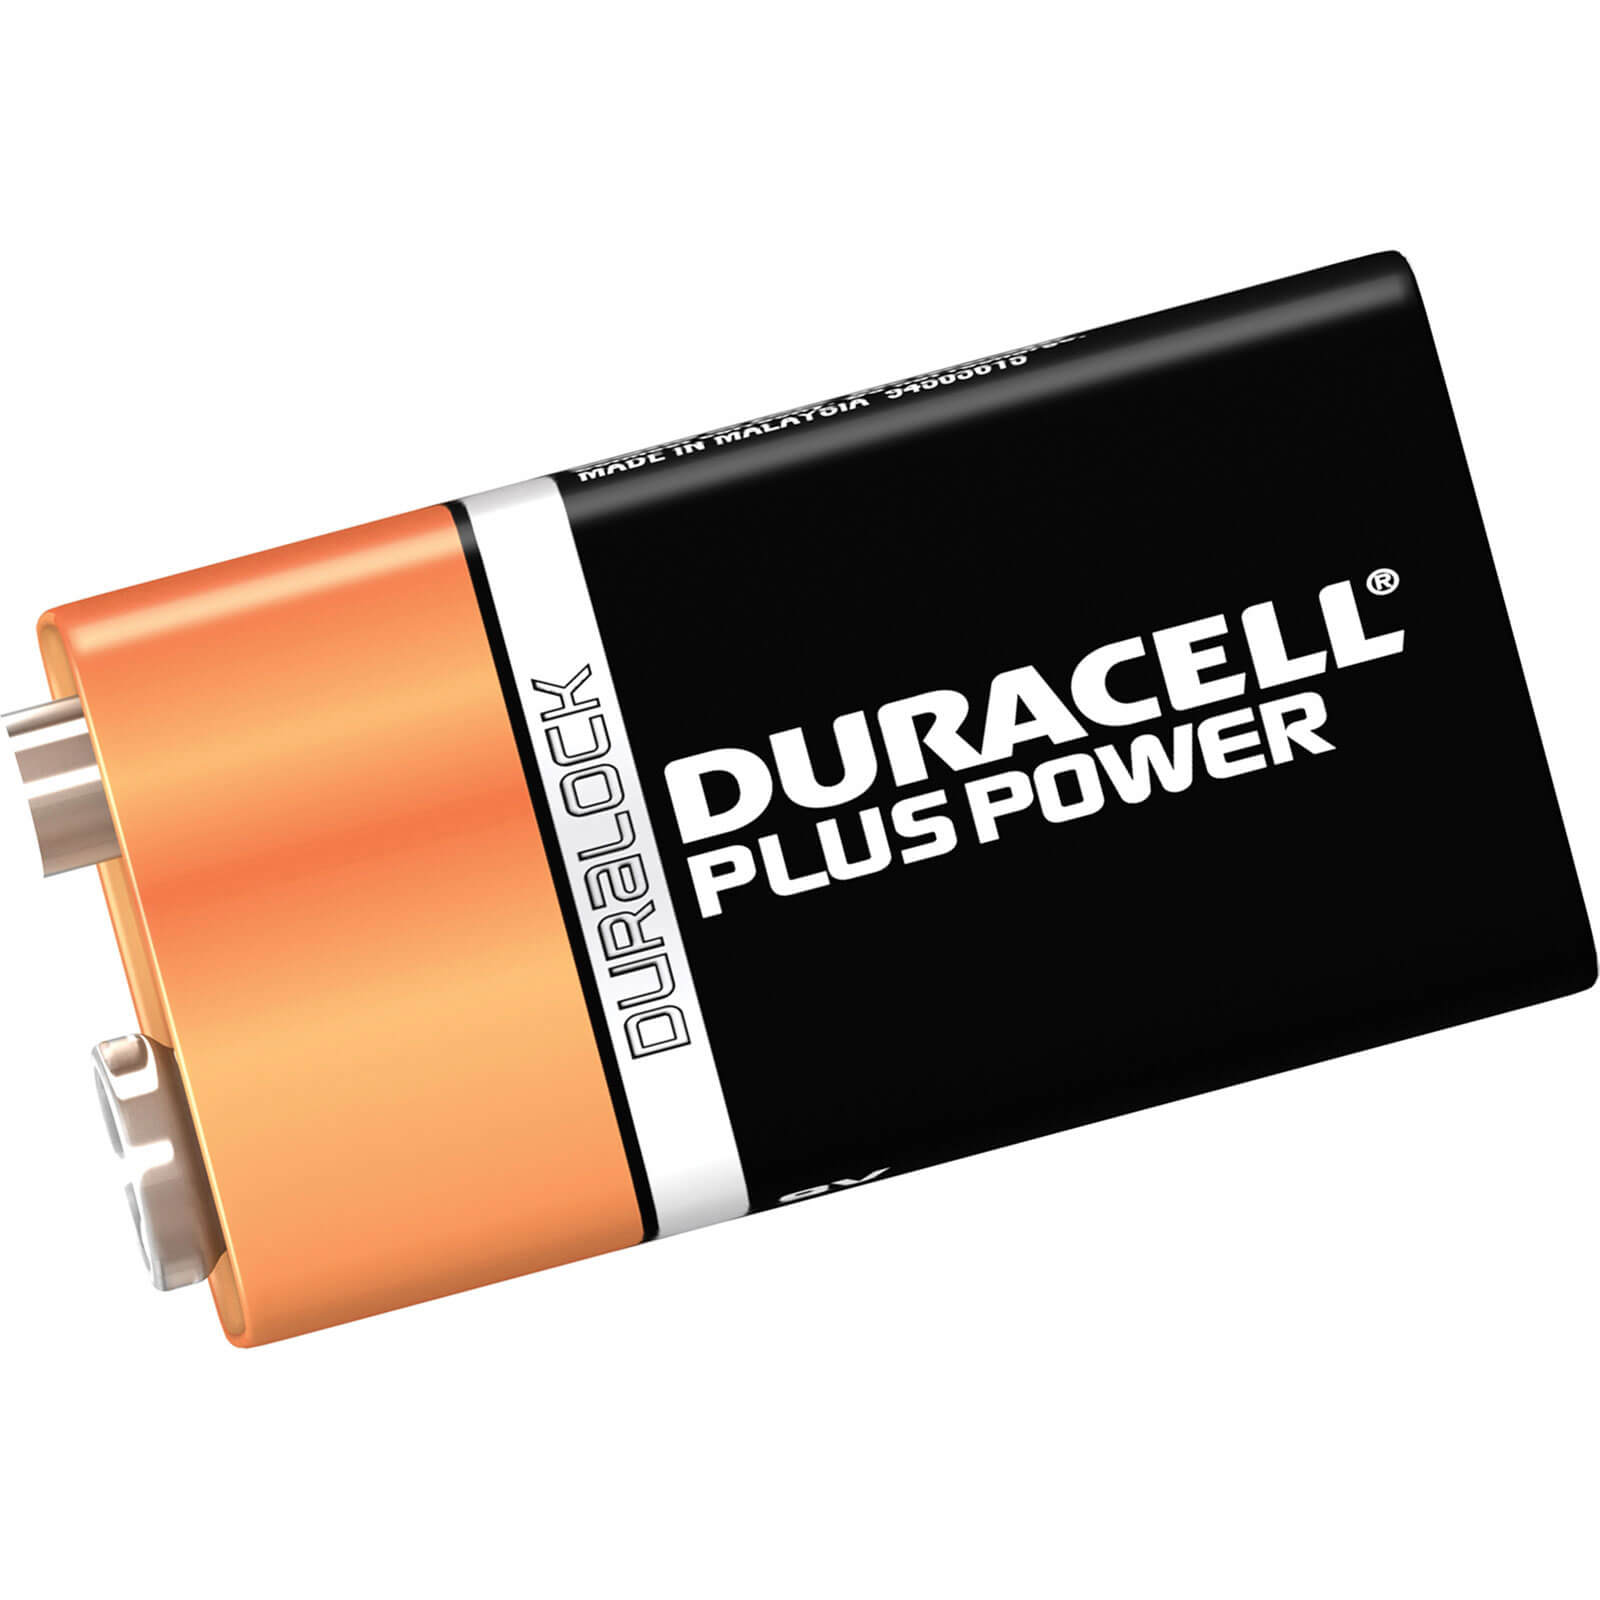 Photo of Duracell 9v Plus Power Batteries Pack Of 2